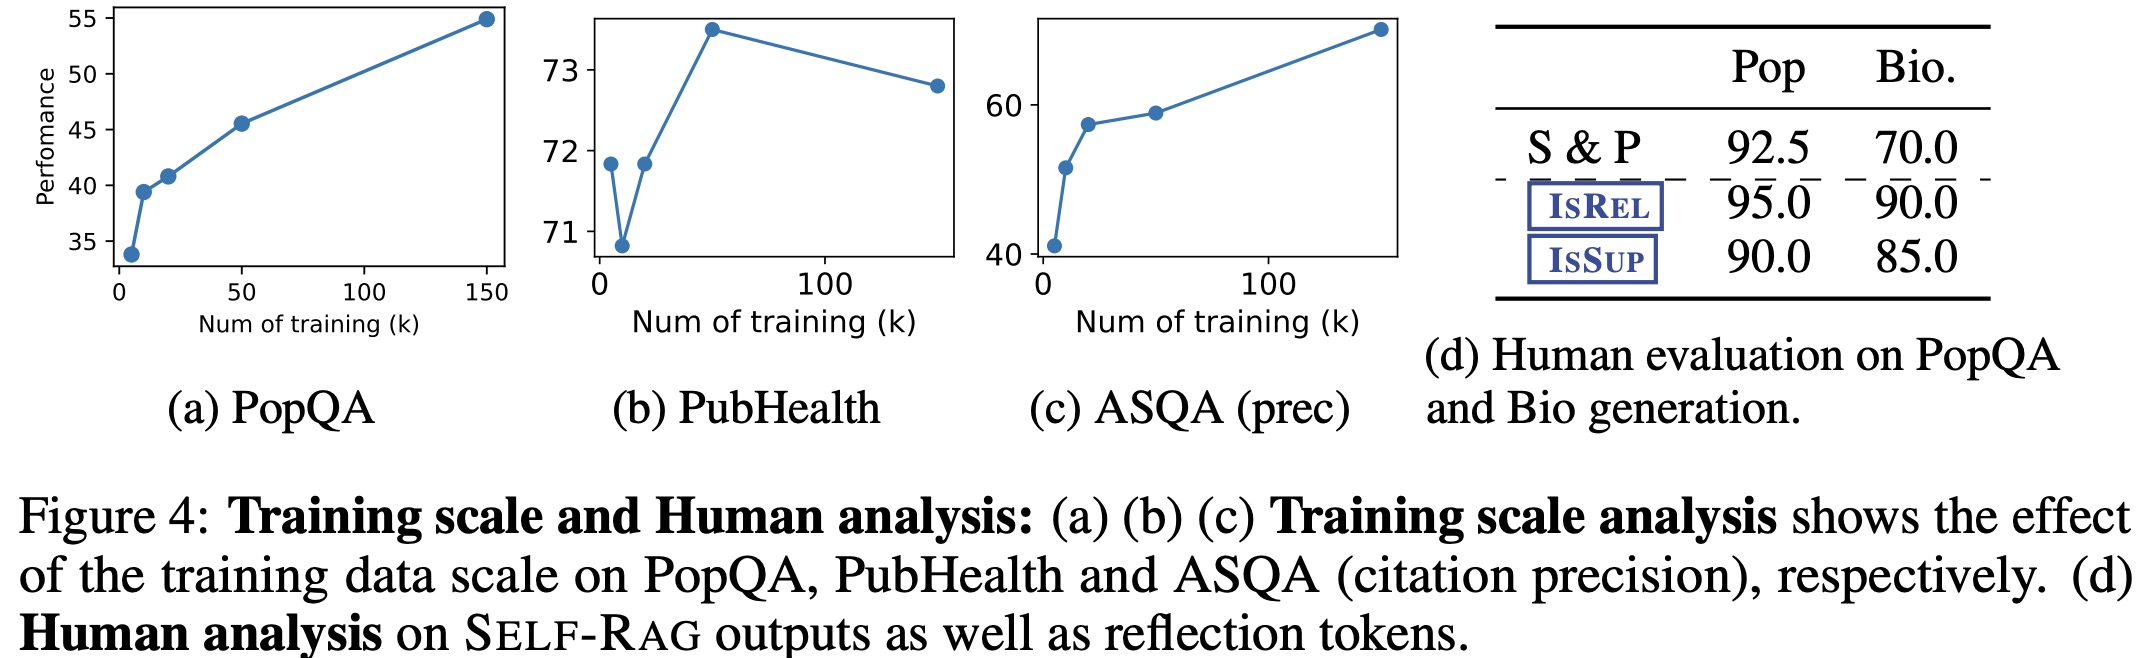 Training scale and Human analysis